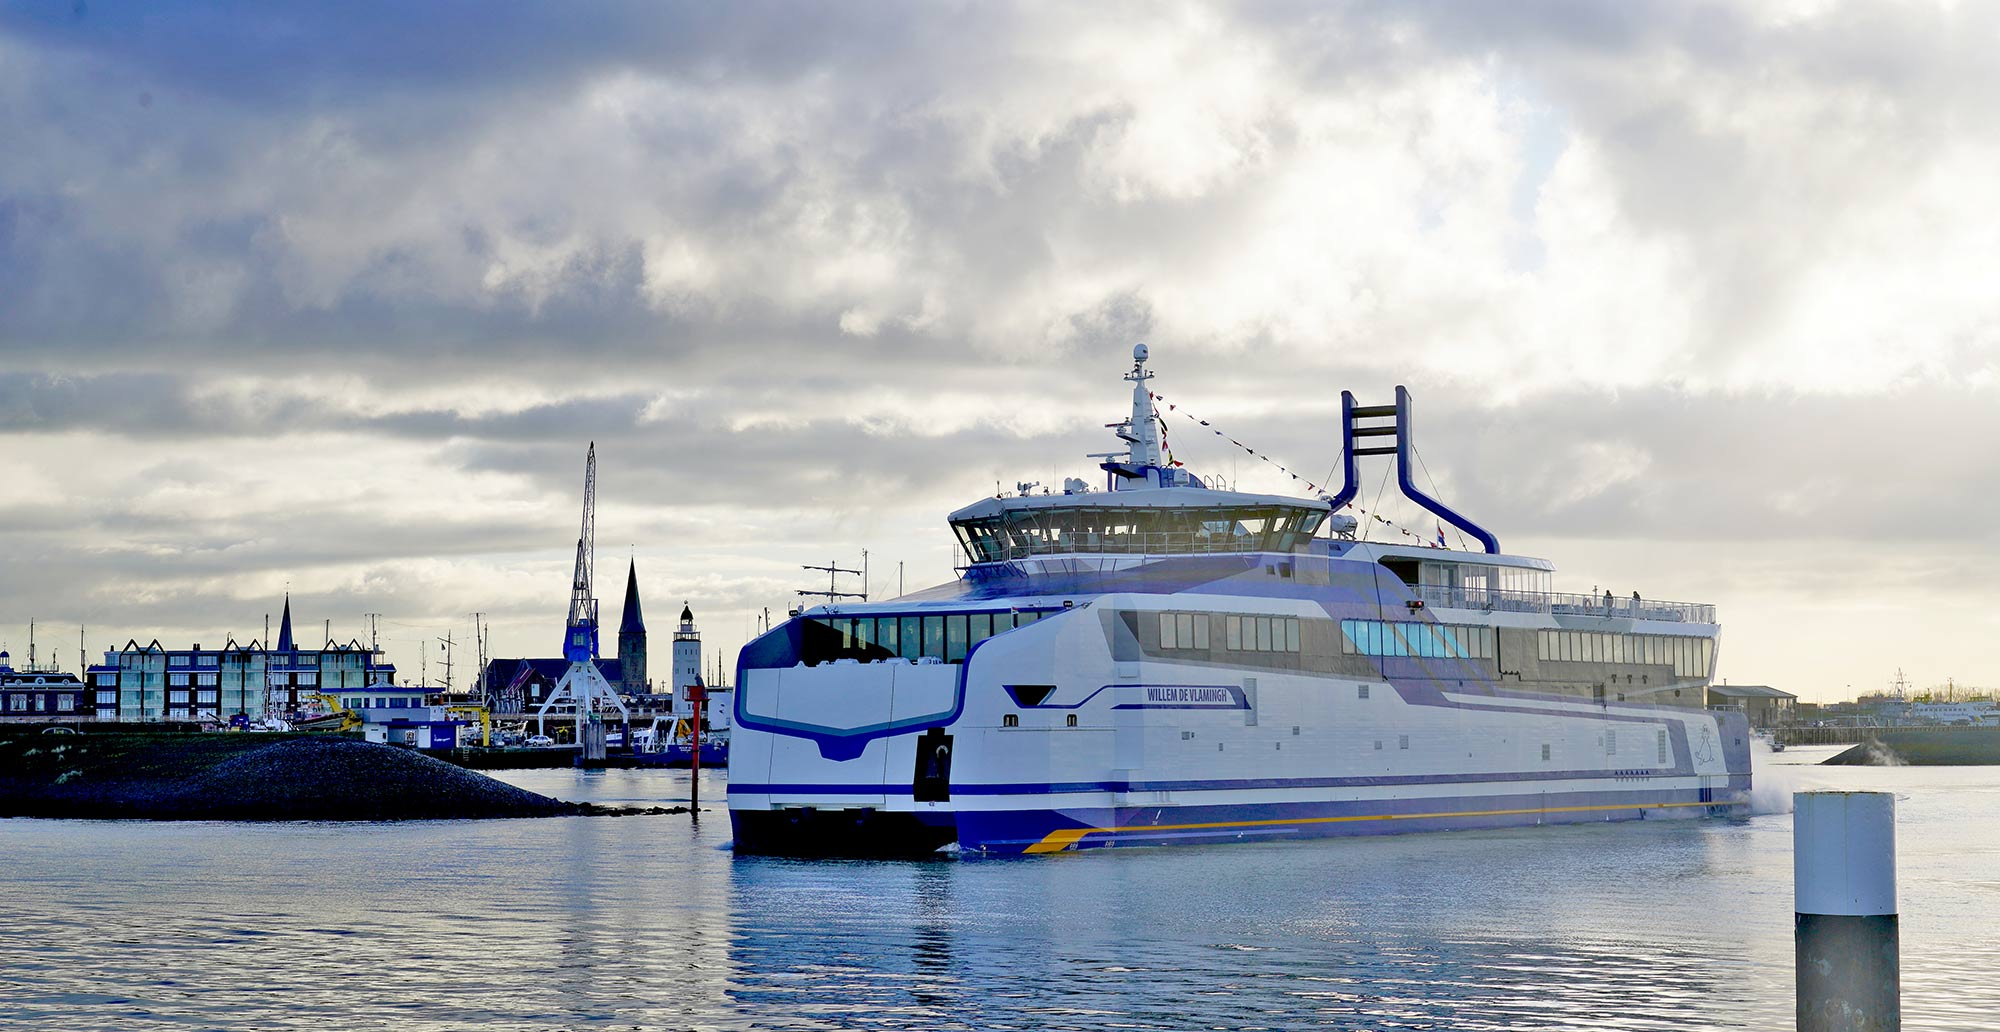 Premiere: In the summer of 2020, the first of Reedereij Doeksen's two passenger ferries, the Willem Barentsz, entered service with the new 16-cylinder mtu gas engines on board, followed by sister ship Willem de Vlamingh (in the picture) in early 2021. Already during the first voyages, advantages of the gas engines that stood out were that they are particularly quiet, do not produce vibrations, unpleasant odor or black smoke.